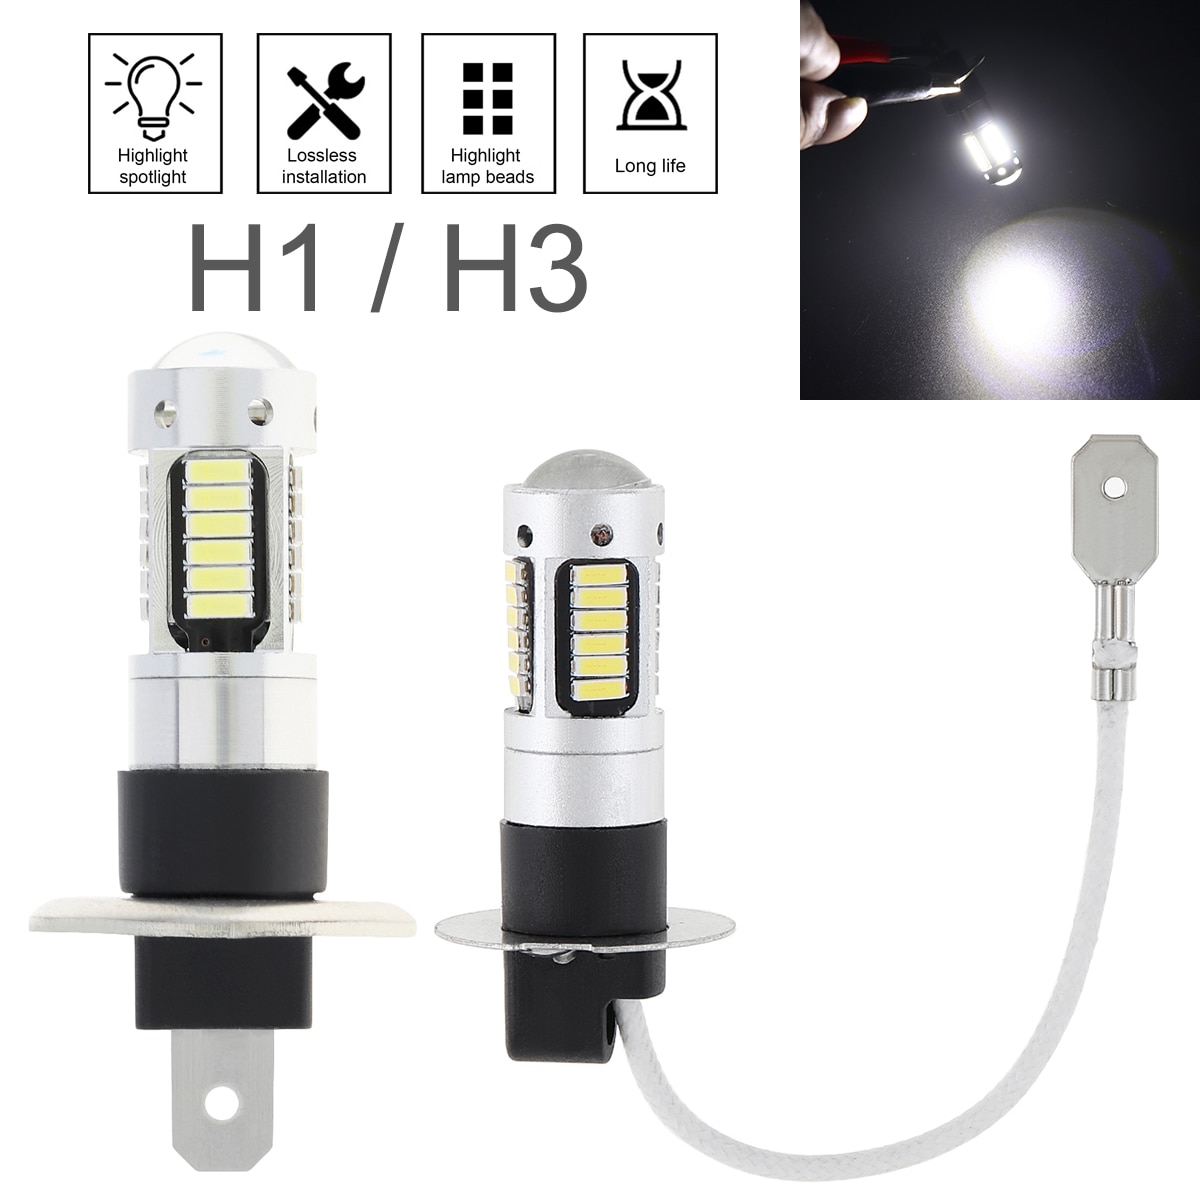   LED  ڵ Ȱ, H1 H3 Canbus 4014 30S..